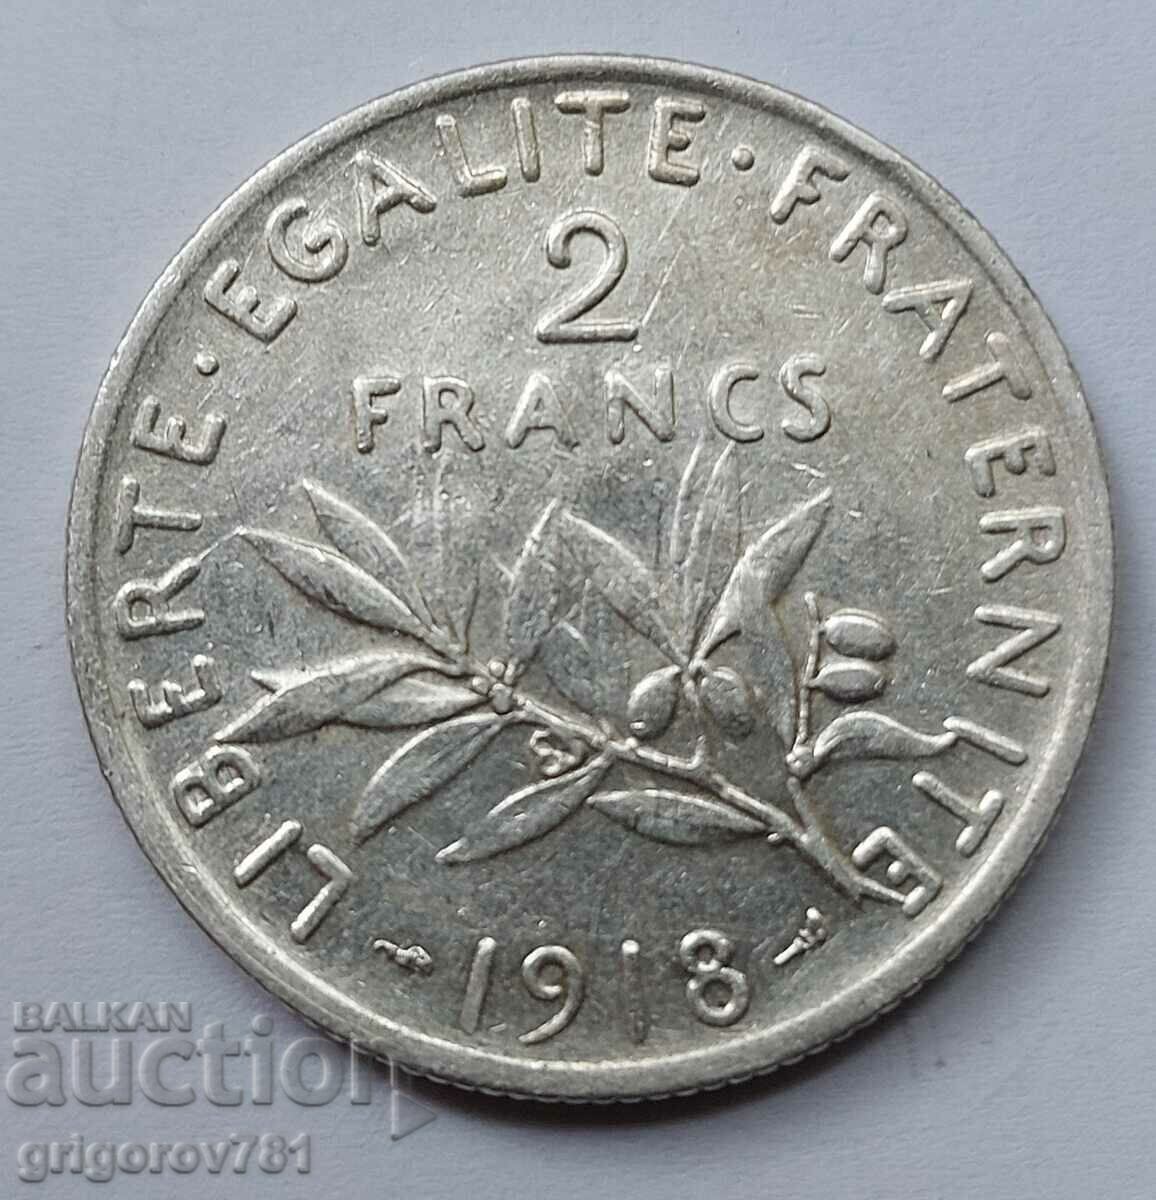 2 Francs Silver France 1918 - Silver Coin #133